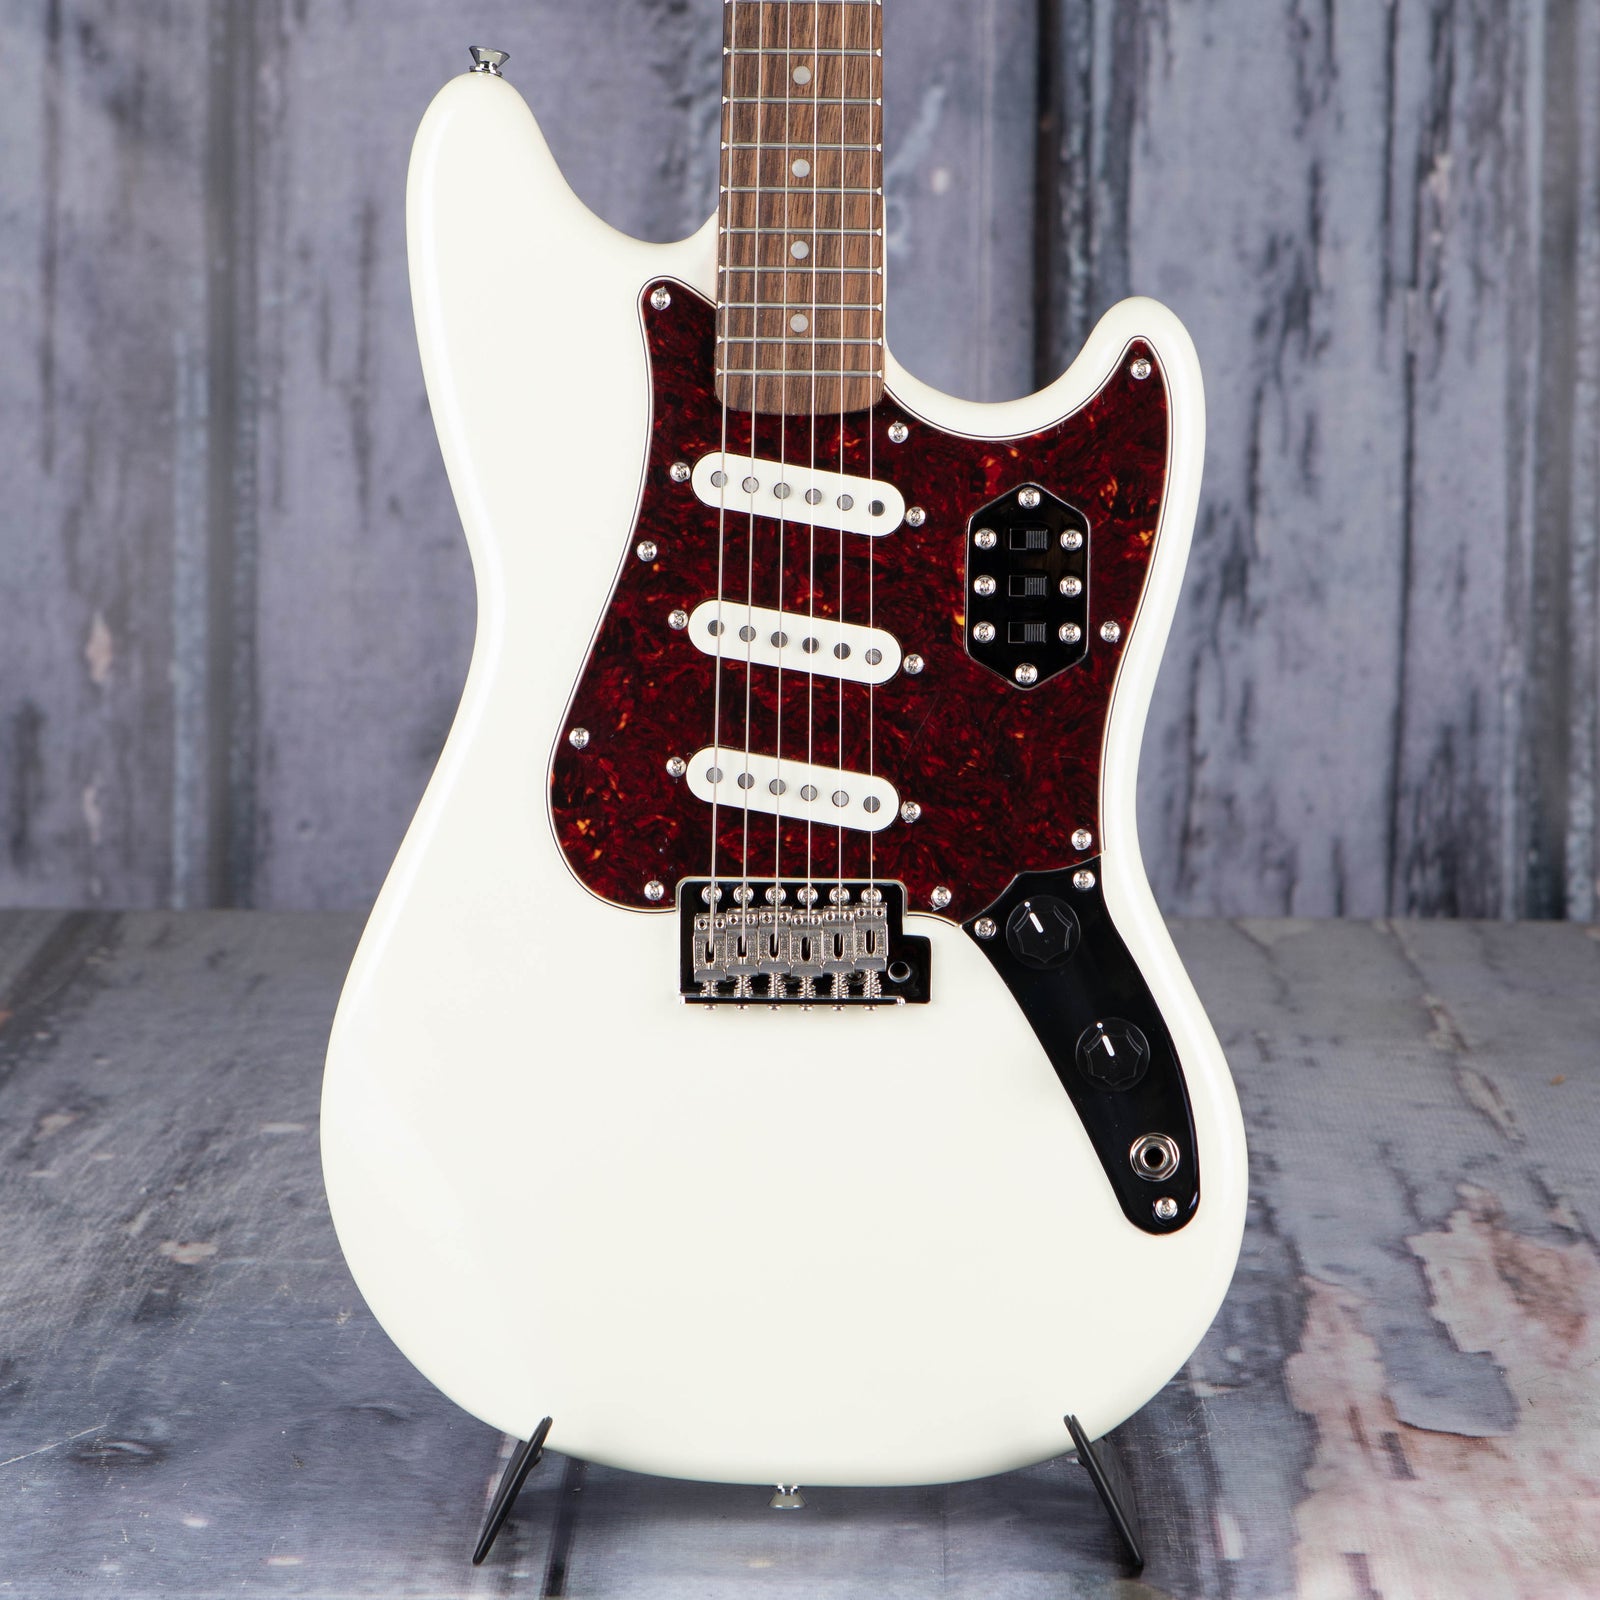 Squier Paranormal Cyclone, Pearl White | For Sale | Replay Guitar